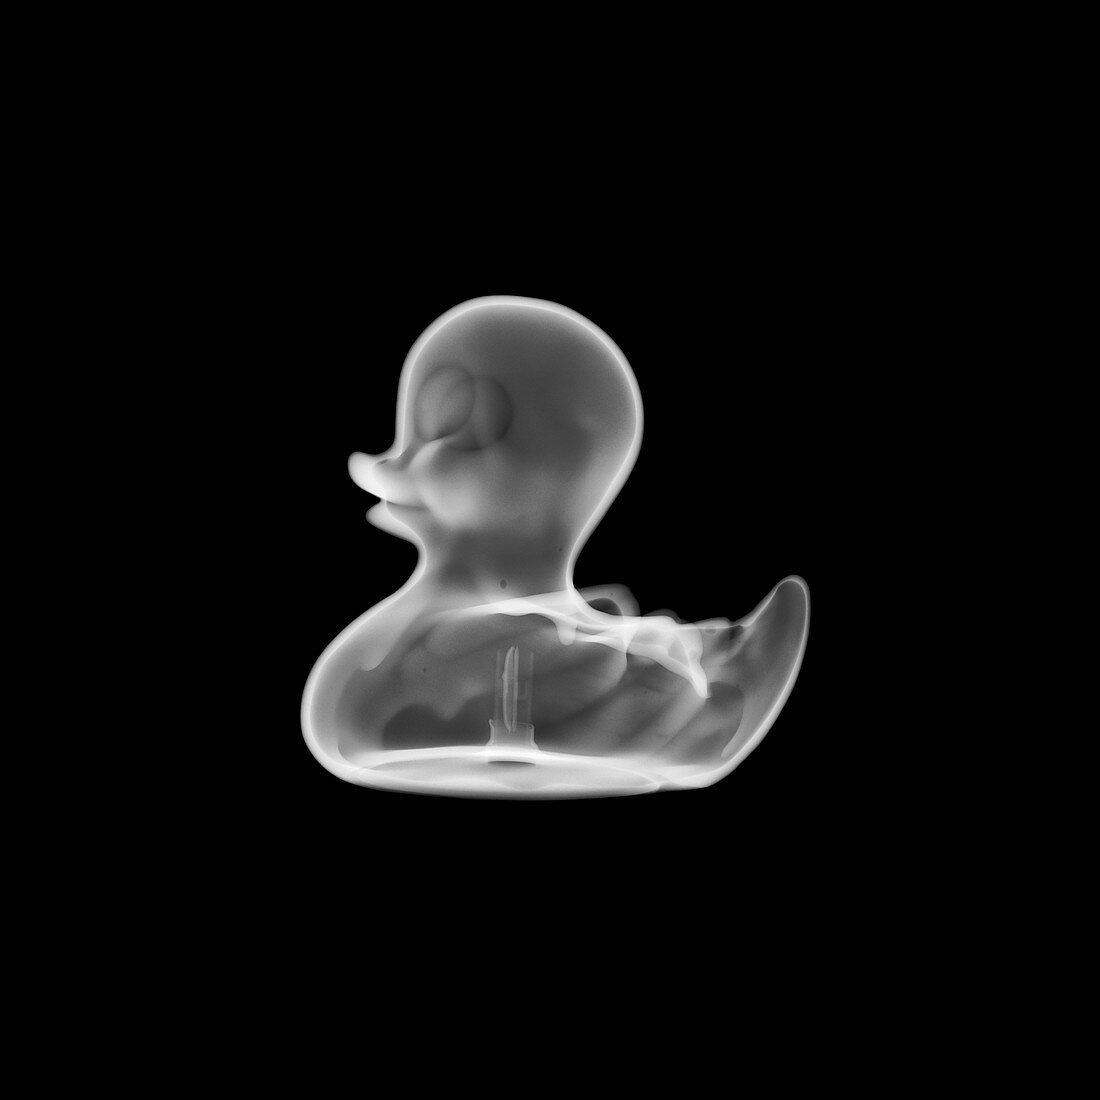 Toy rubber duck, X-ray